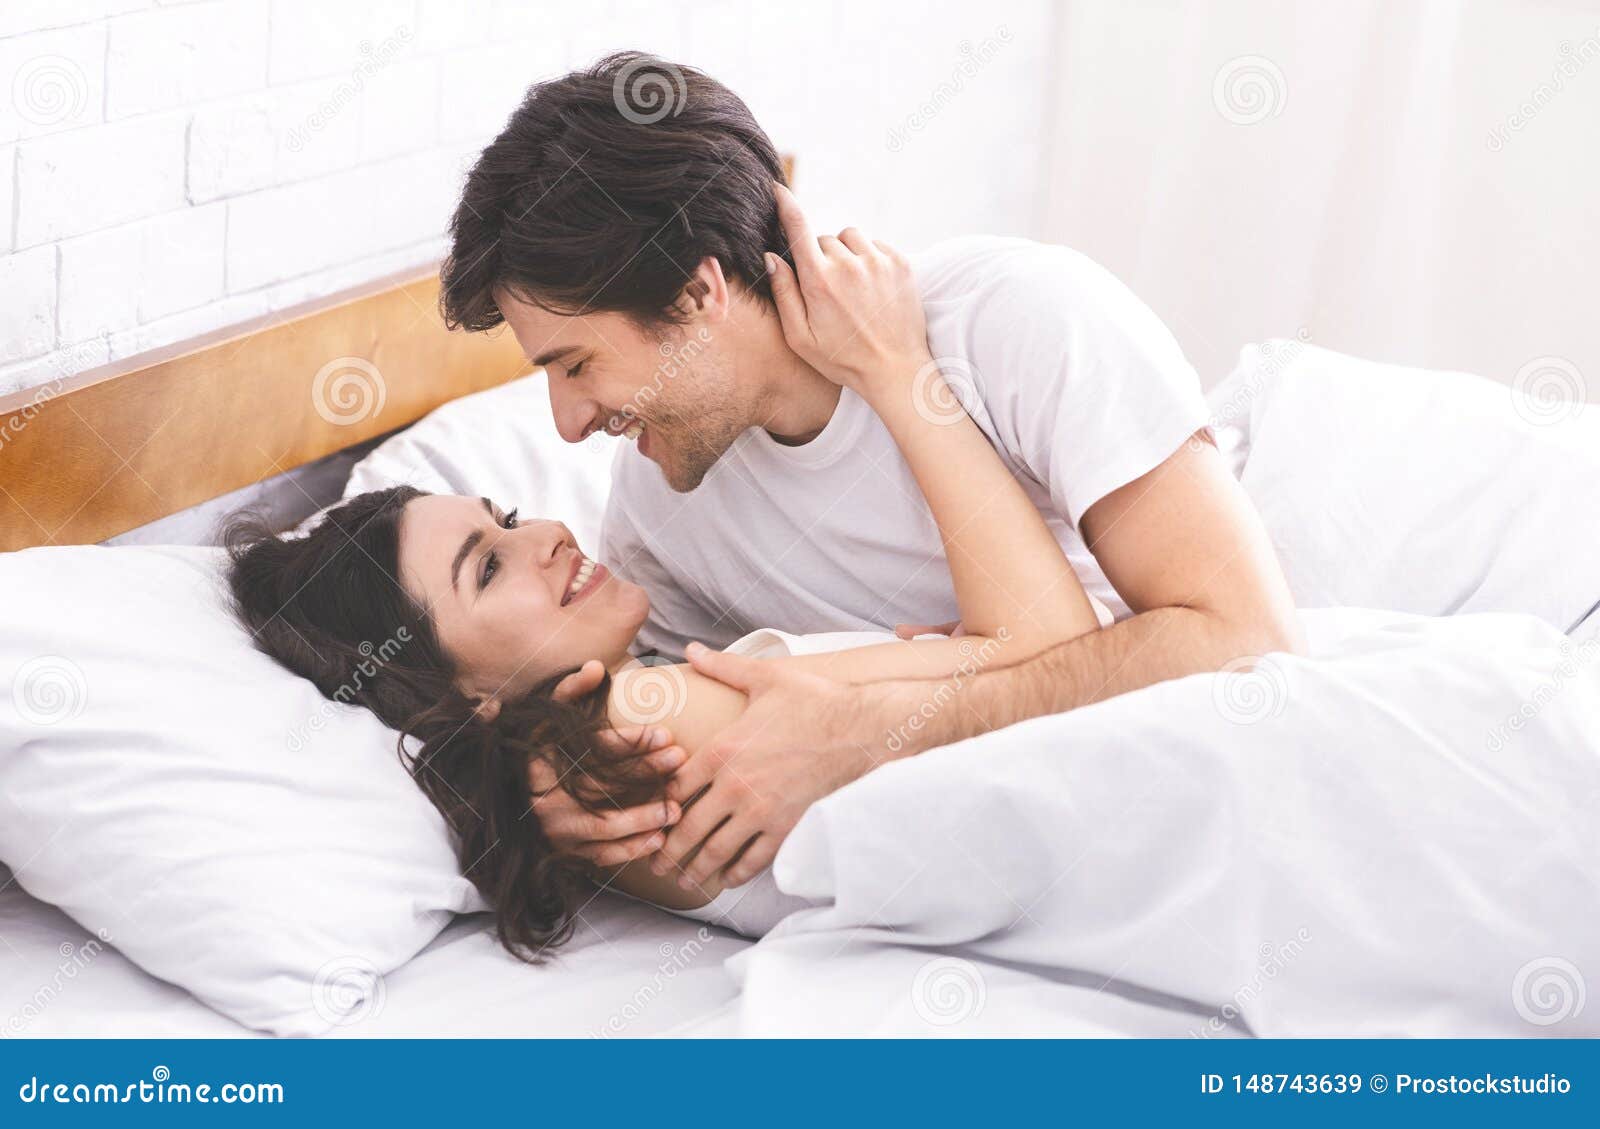 Top View on Young Loving Black Couple Lying in Bed Stock Image ...